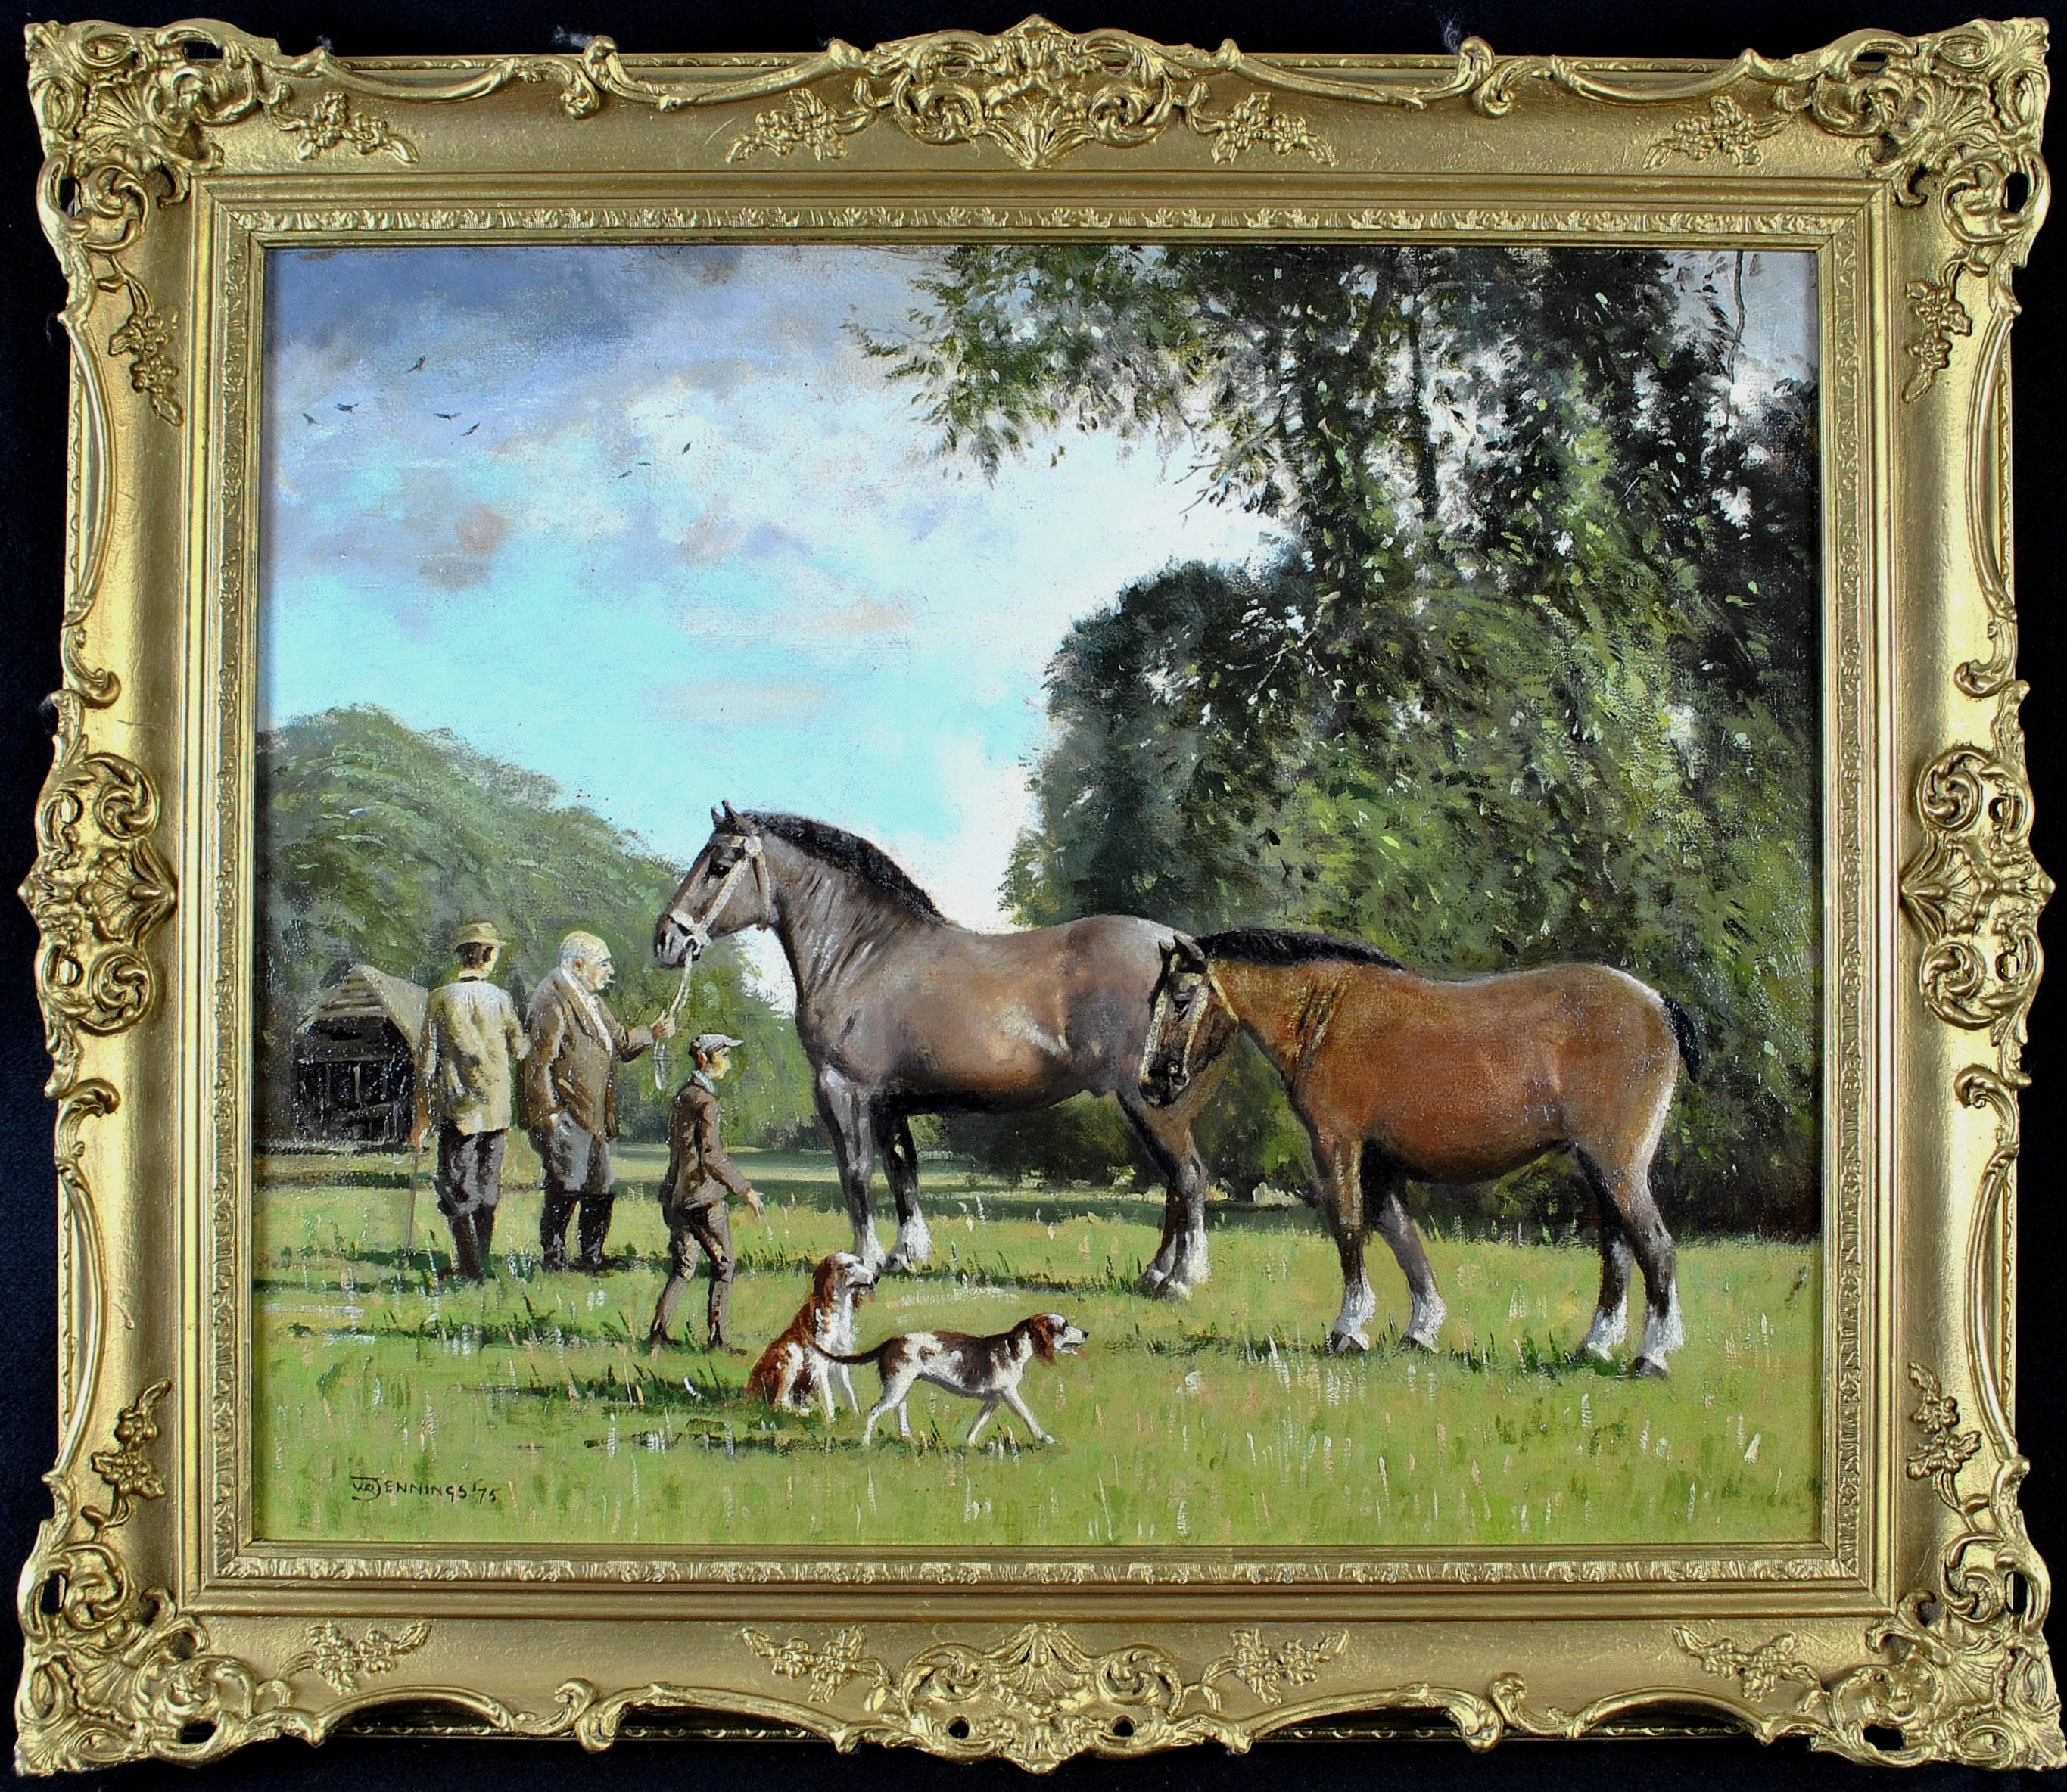 Out of Harness - Large English Oil on Canvas Horses in a Landscape Painting